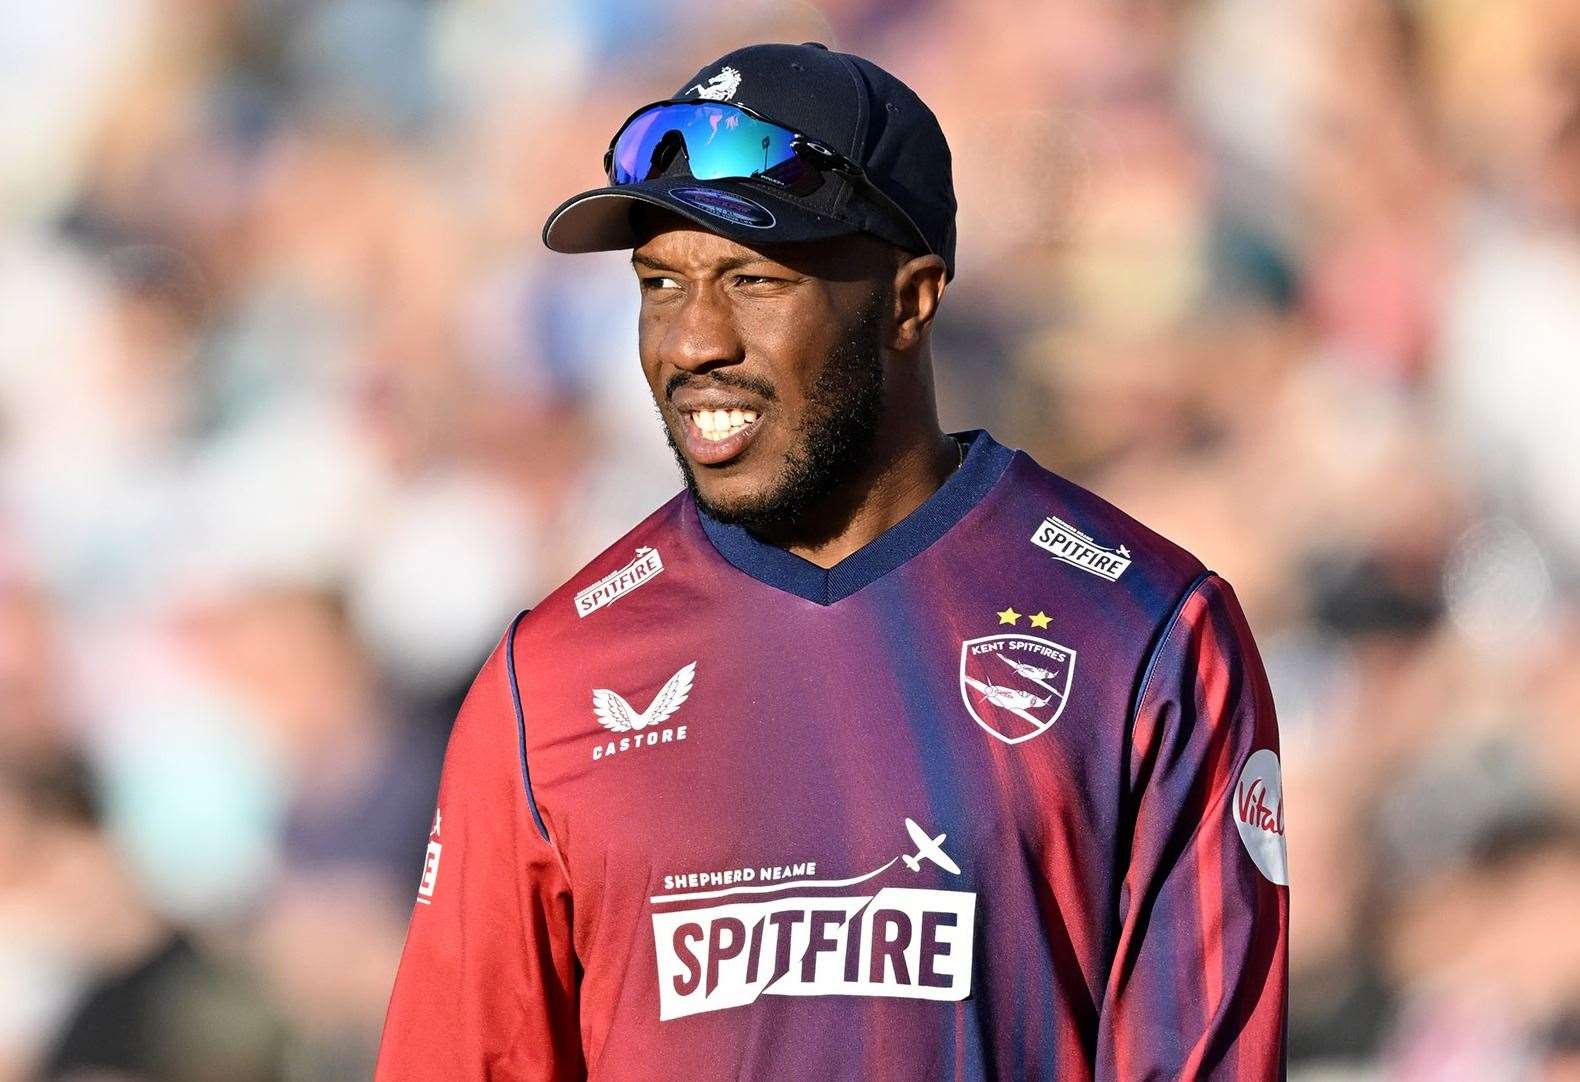 Daniel Bell-Drummond – scored a history-making 300 not out in Kent’s County Championship clash against Northamptonshire. Picture: Keith Gillard